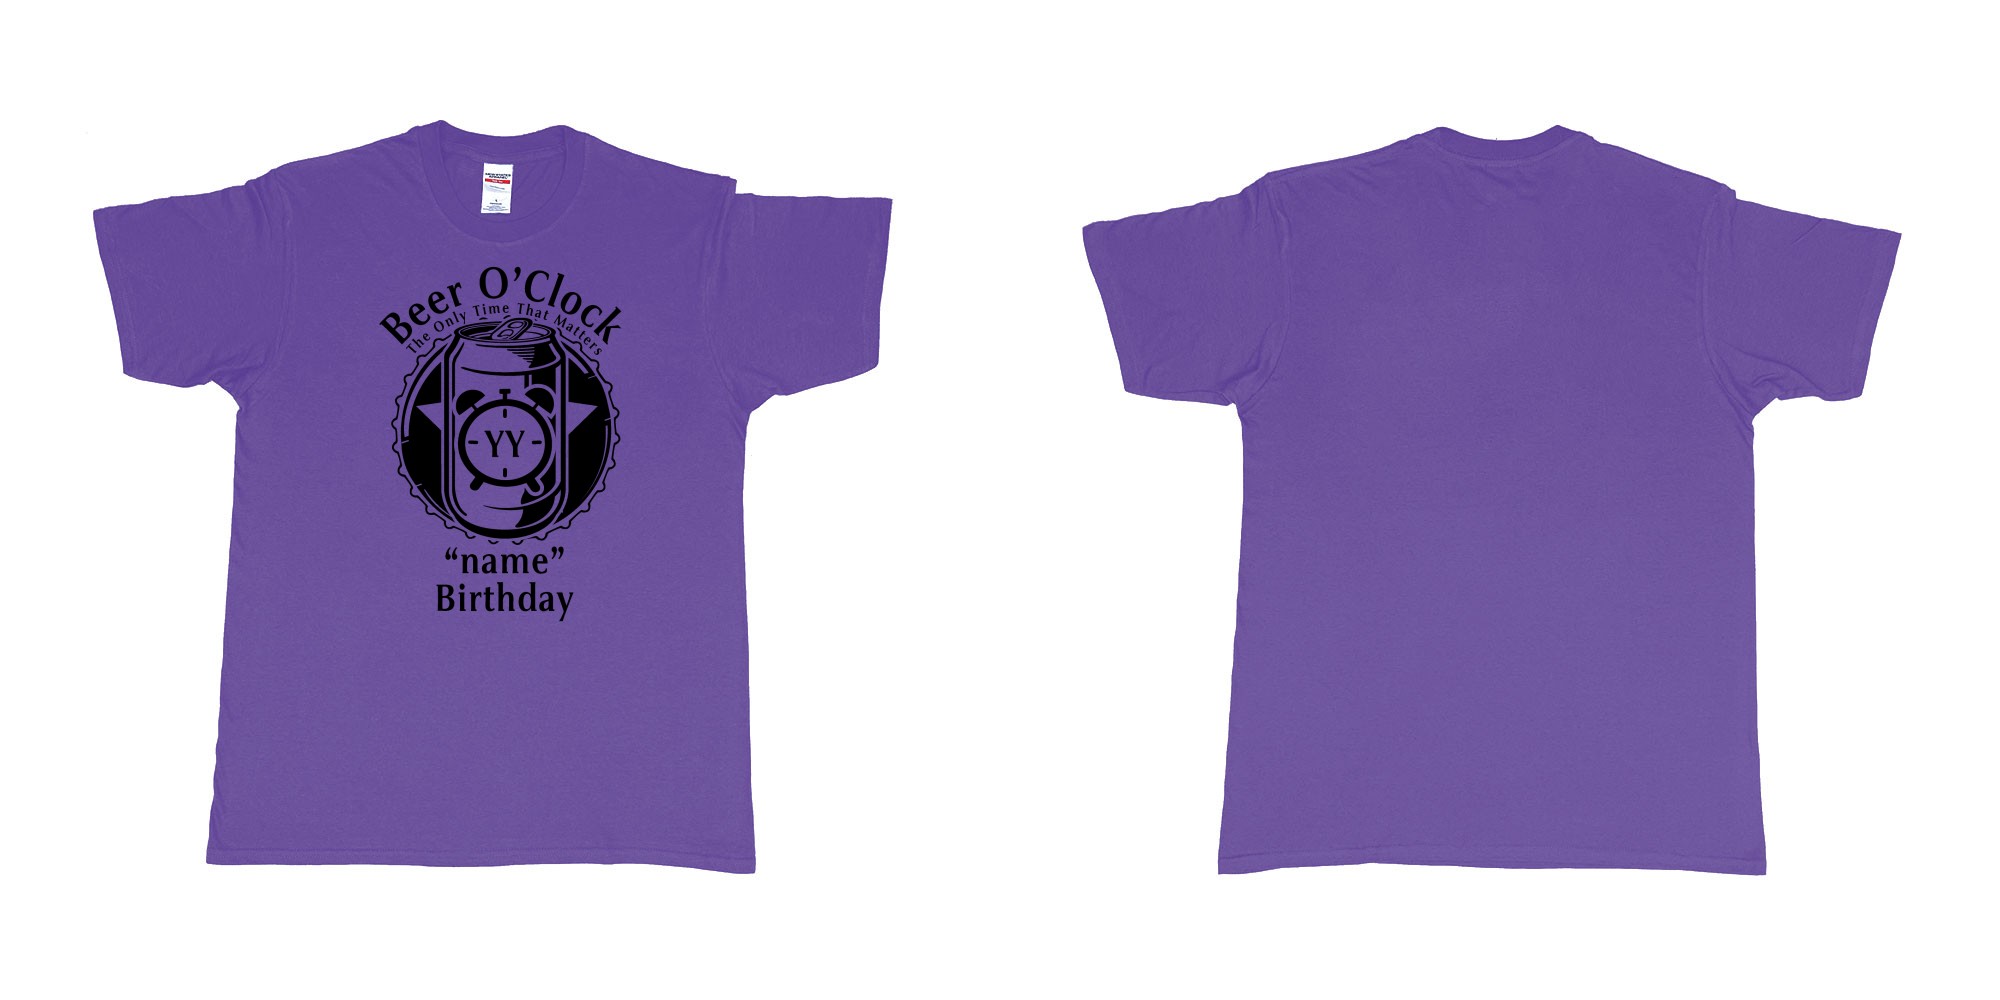 Custom tshirt design beer oclock the only time that matters custom year and names birthday bali in fabric color purple choice your own text made in Bali by The Pirate Way